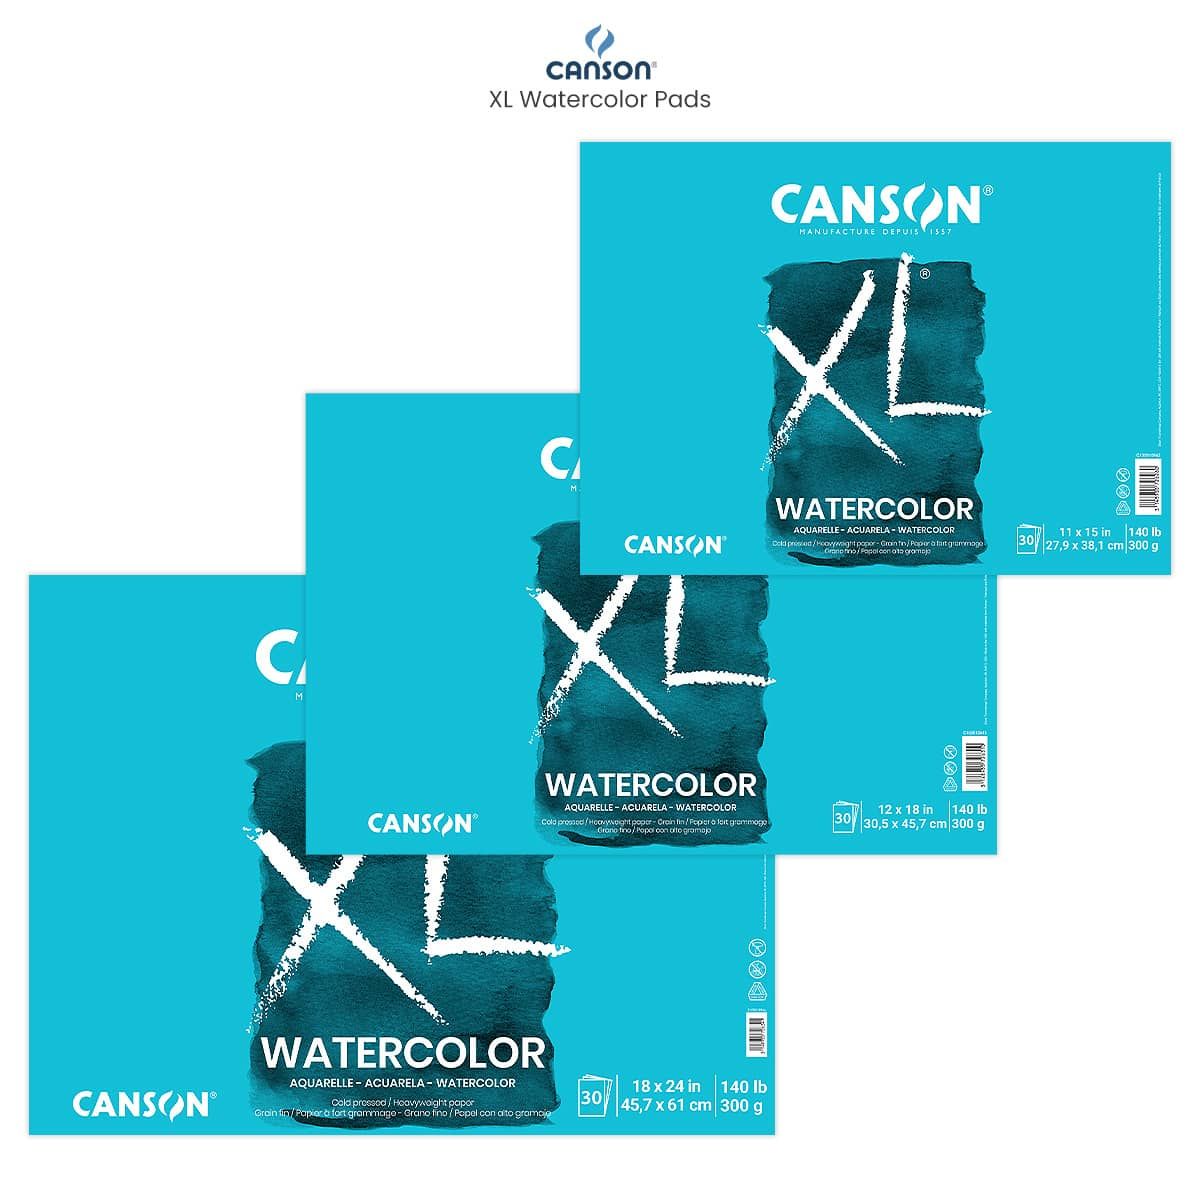 Canson Classic Cream Drawing Pad 18in. x 24in. 24 Sheets